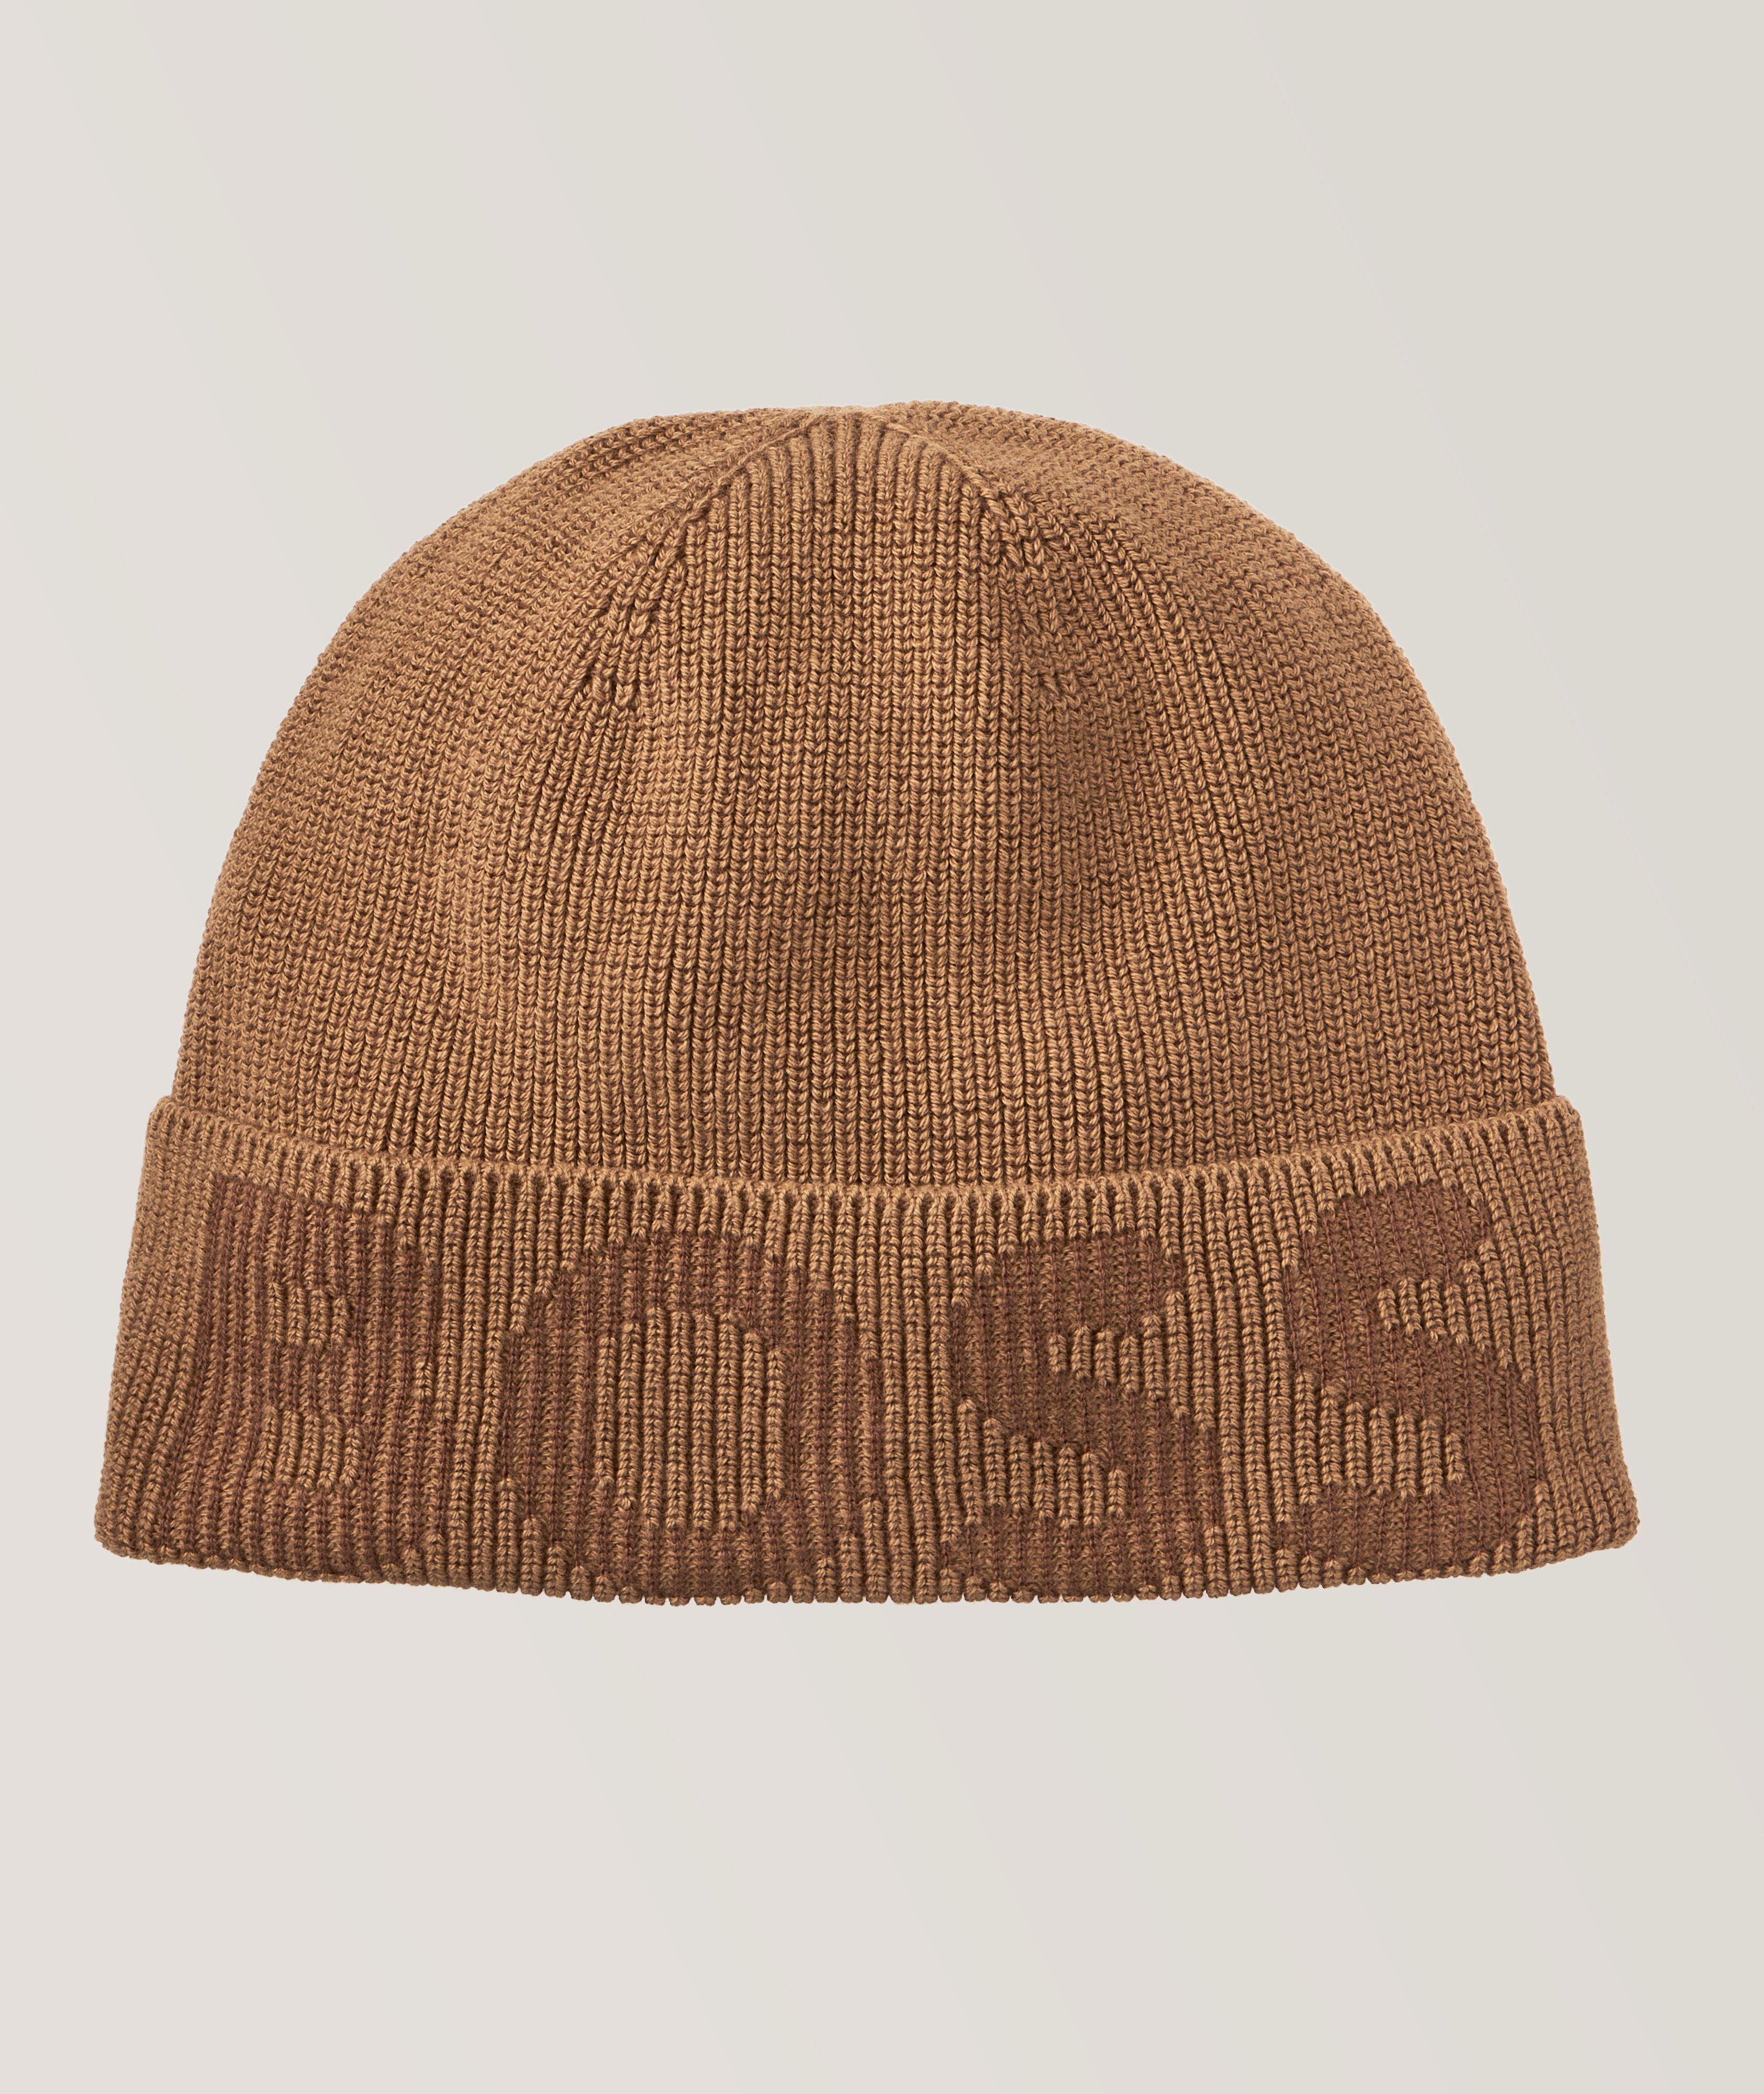 Lamico Knitted Cotton-Wool Toque image 0